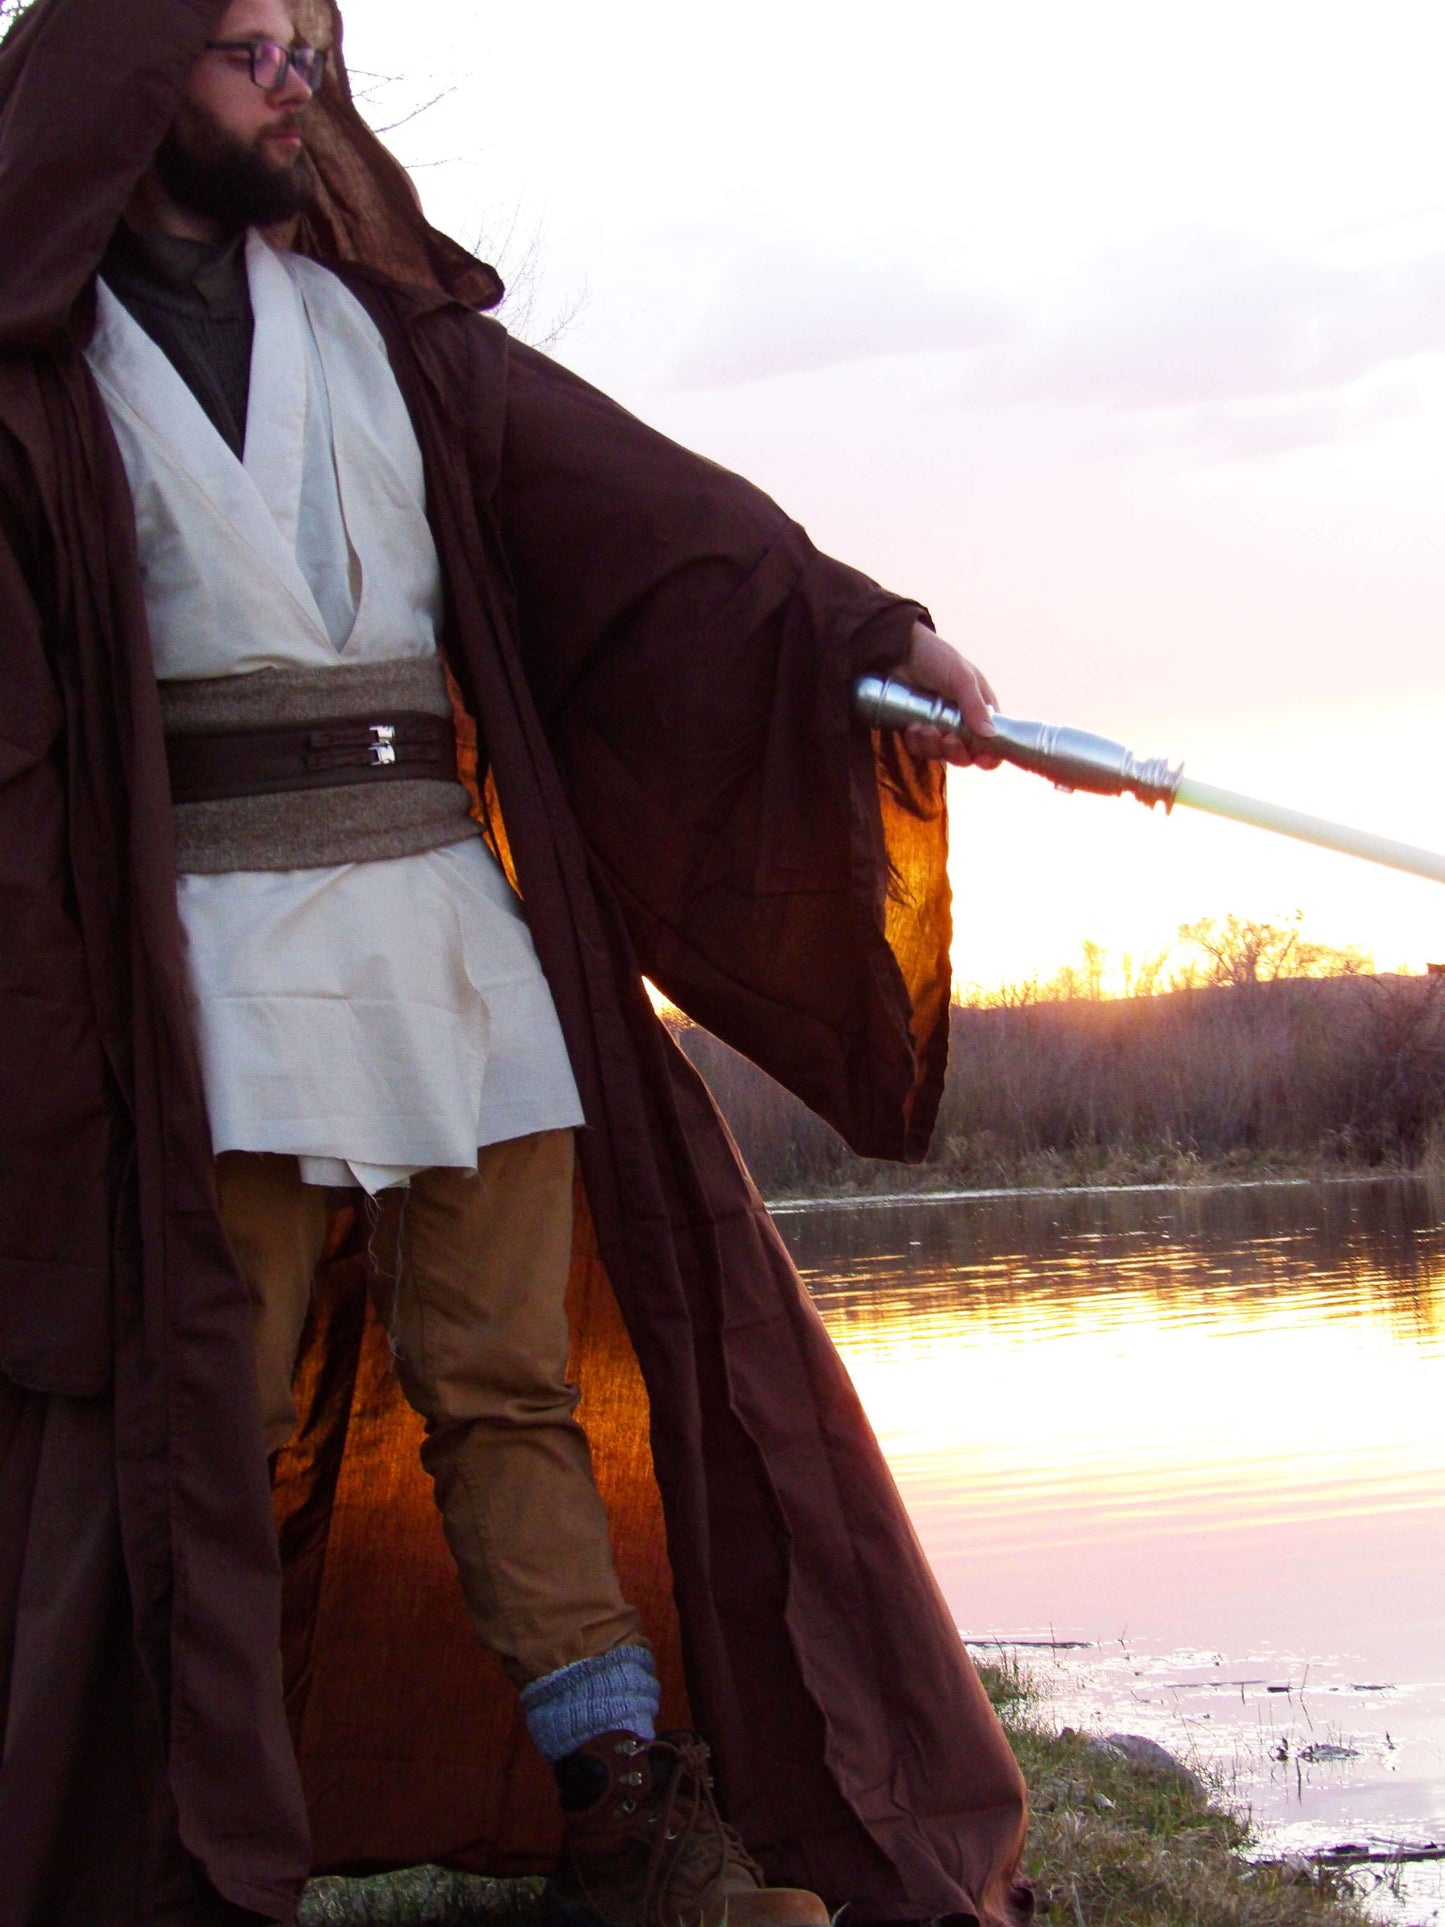 Jedi Cosplay with Full Brown Robe and Under Robes in Light Biege